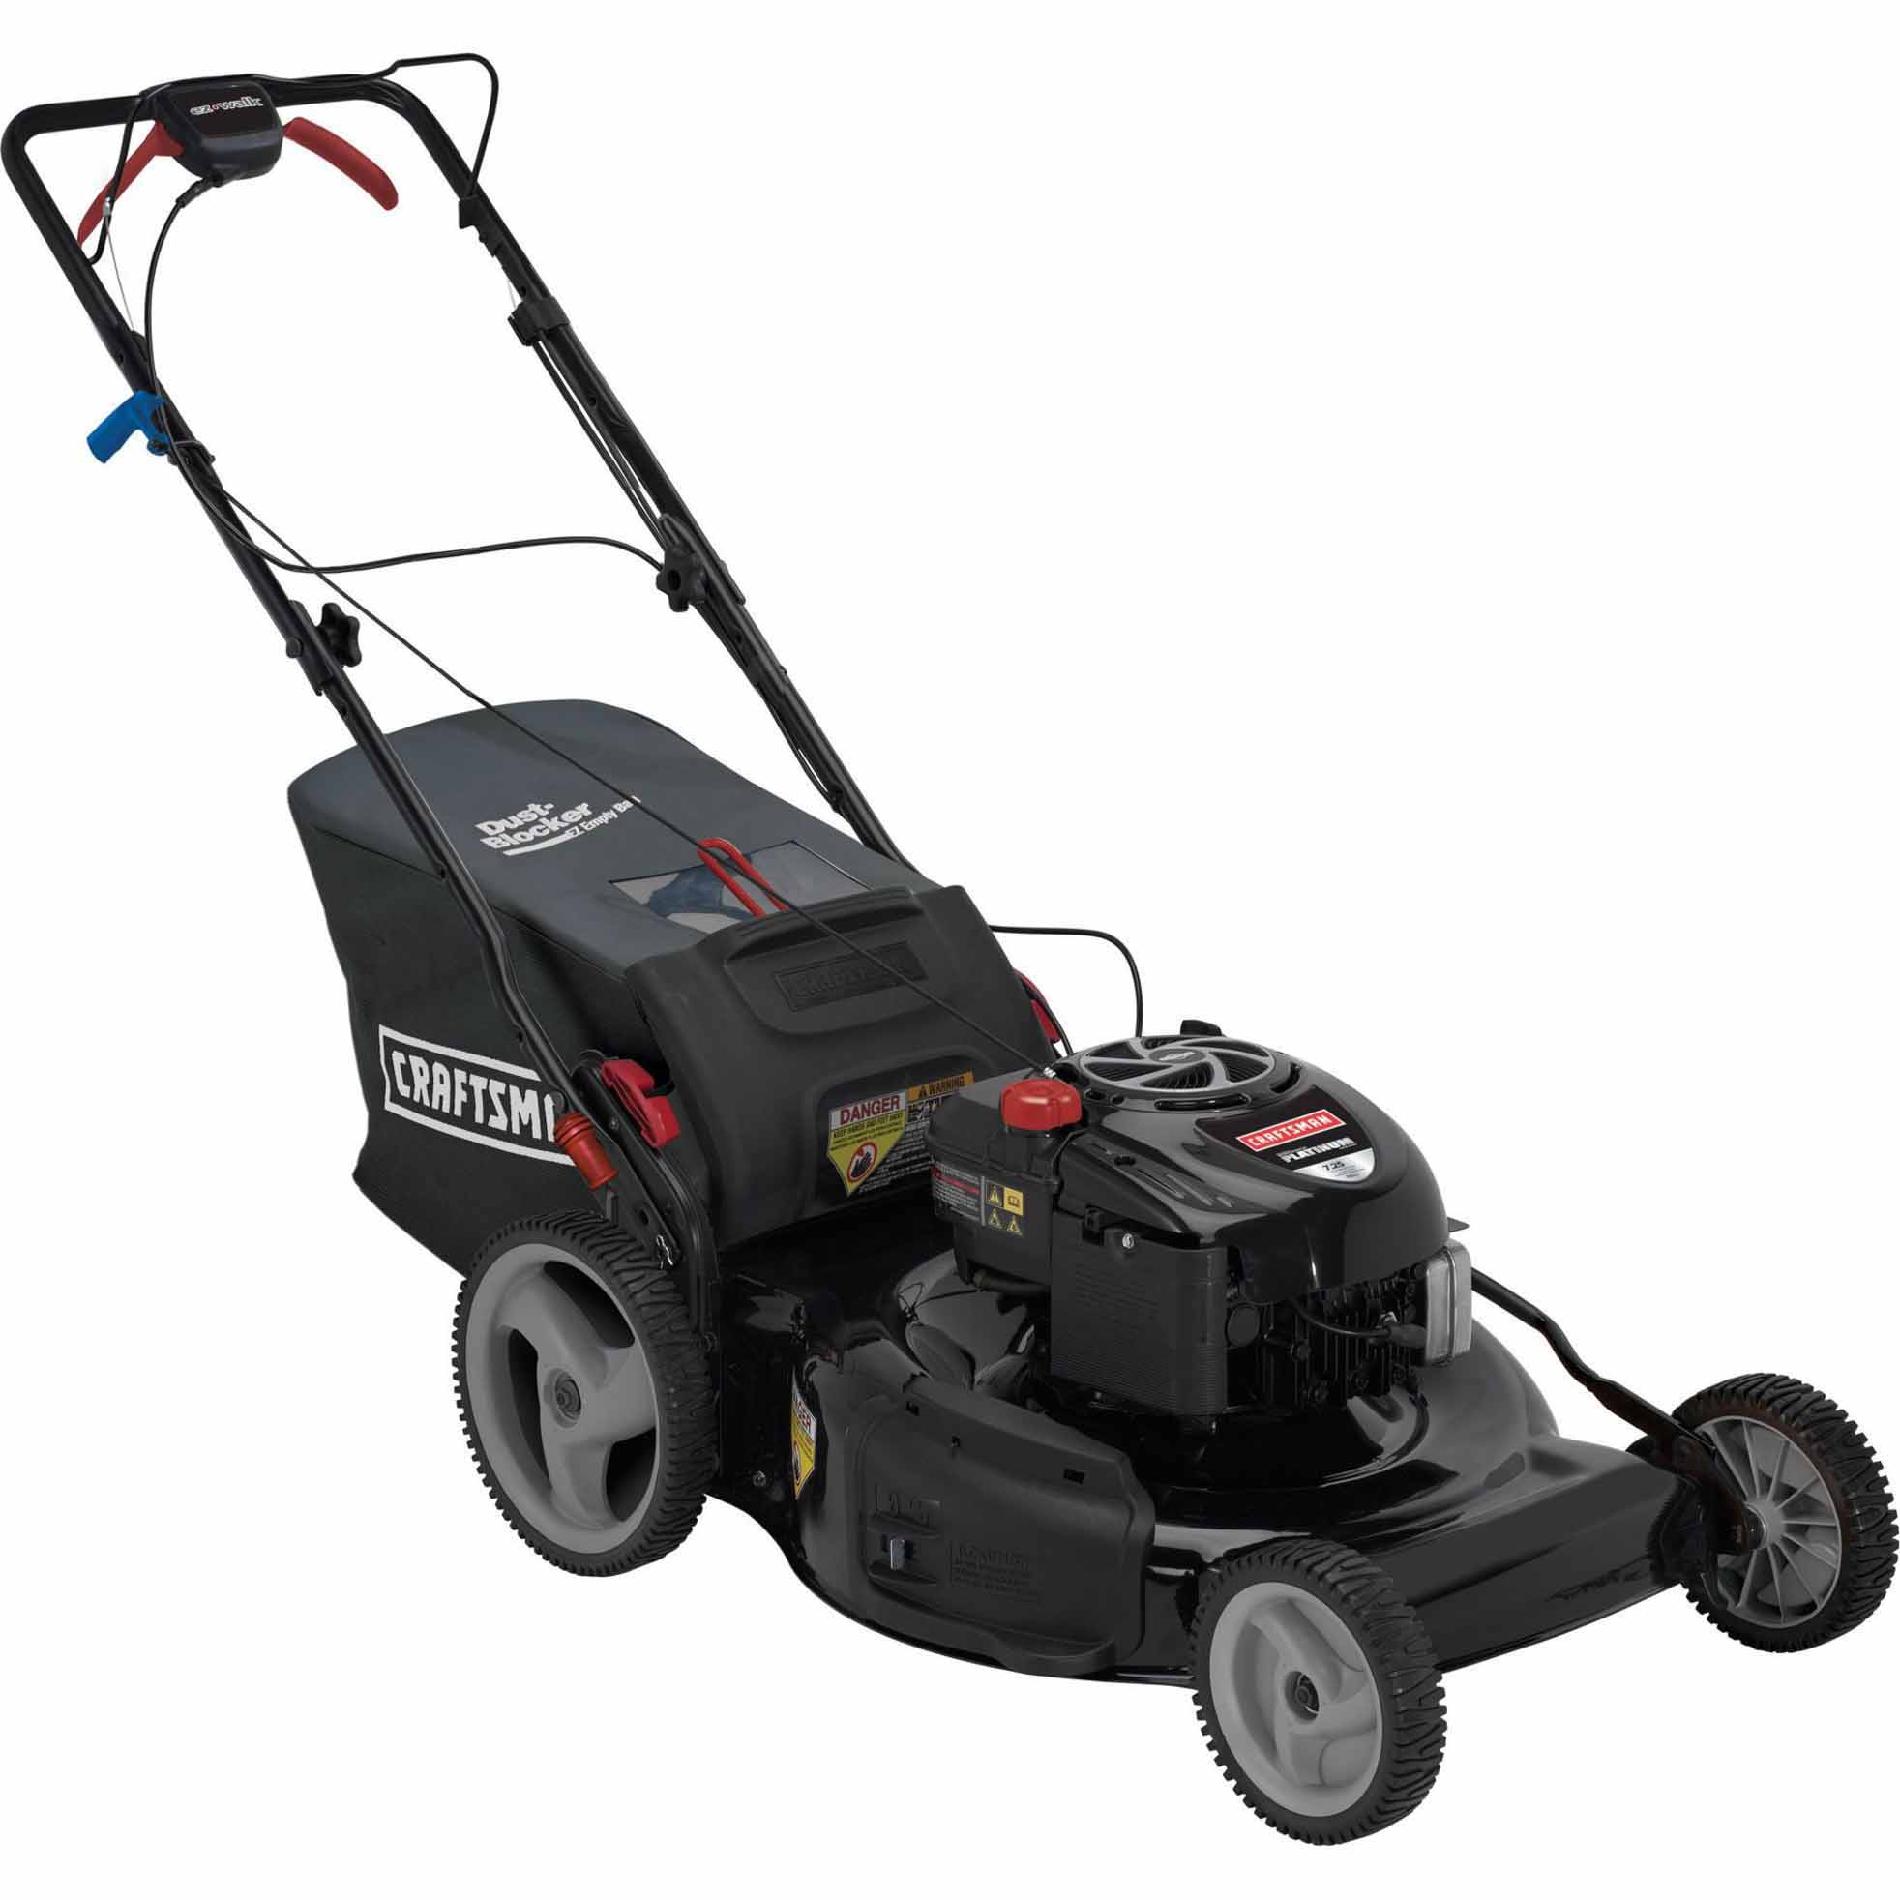 Craftsman Self-Propelled Lawn Mower: High-Quality Mowers At Sears